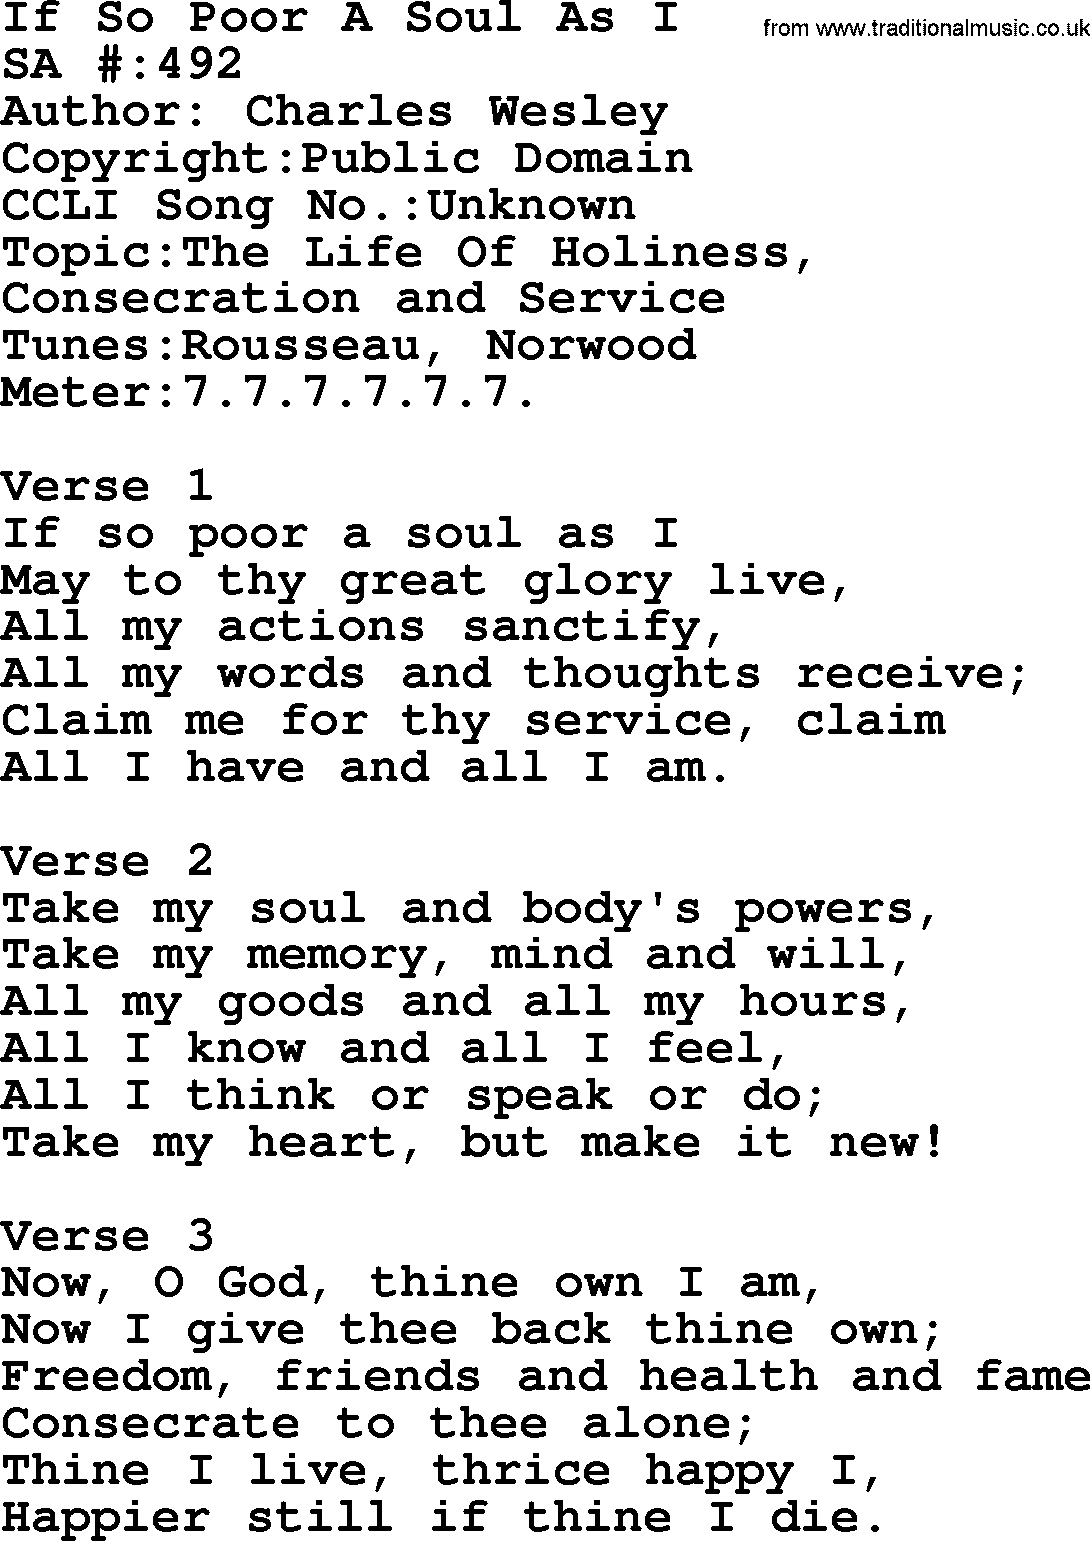 Salvation Army Hymnal, title: If So Poor A Soul As I, with lyrics and PDF,